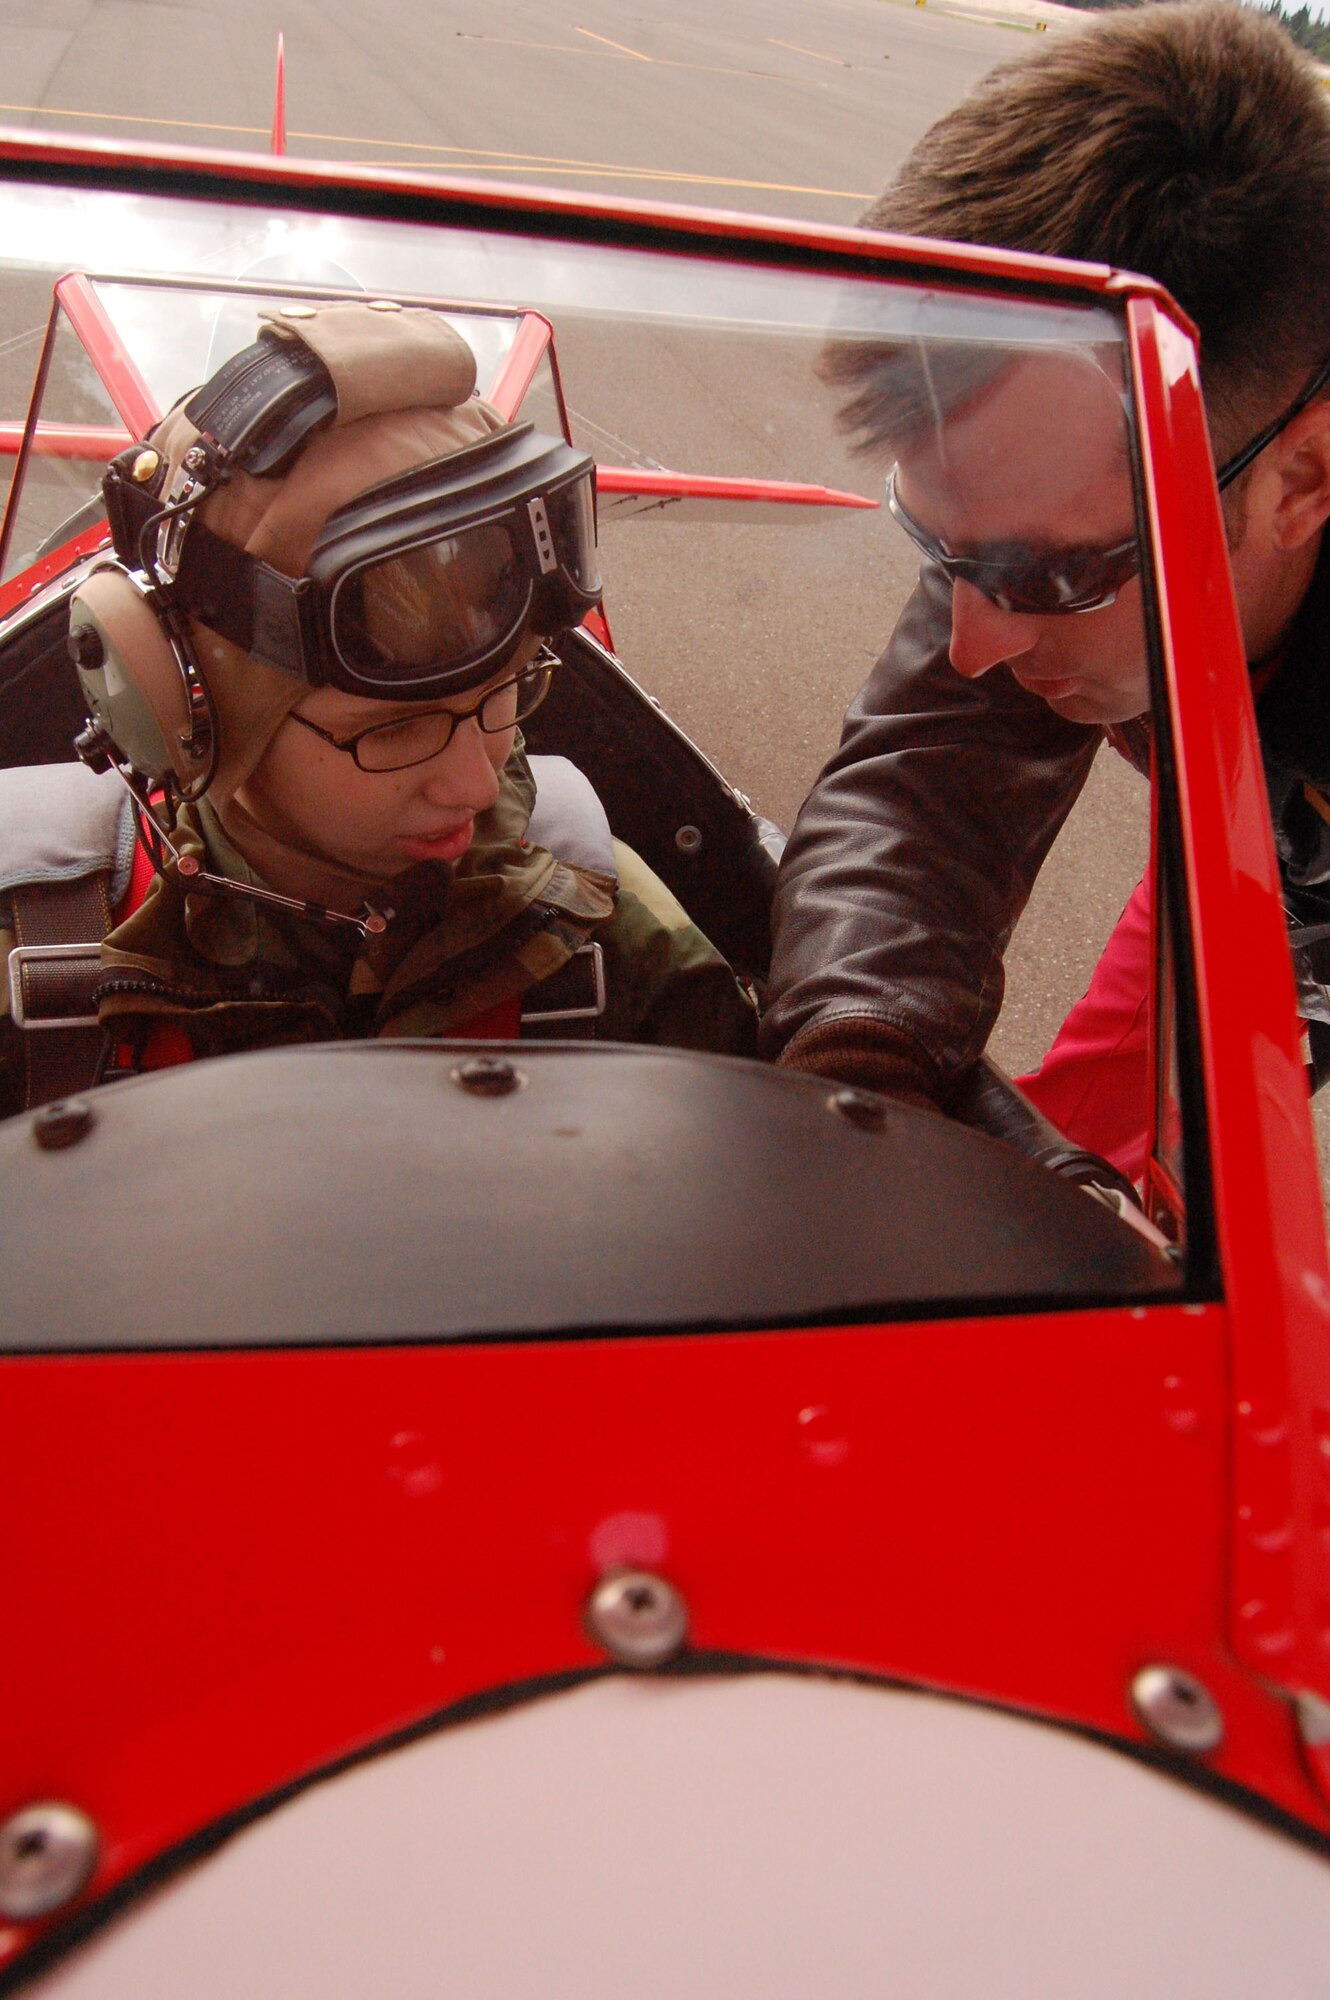 LAUGHLIN AIR FORCE BASE, Texas -- Airman Lindy Leggett, 47th Aero medical Dental Squadron, is instructed on the details of the Stearman Biplane by Matt Losaker, Red Baron Squadron Aerial Demonstration team, before experiencing her first ride with the Red Baron Pizza Squadron October 22. (U.S. Air Force photo by Airman Sara Csurilla) 